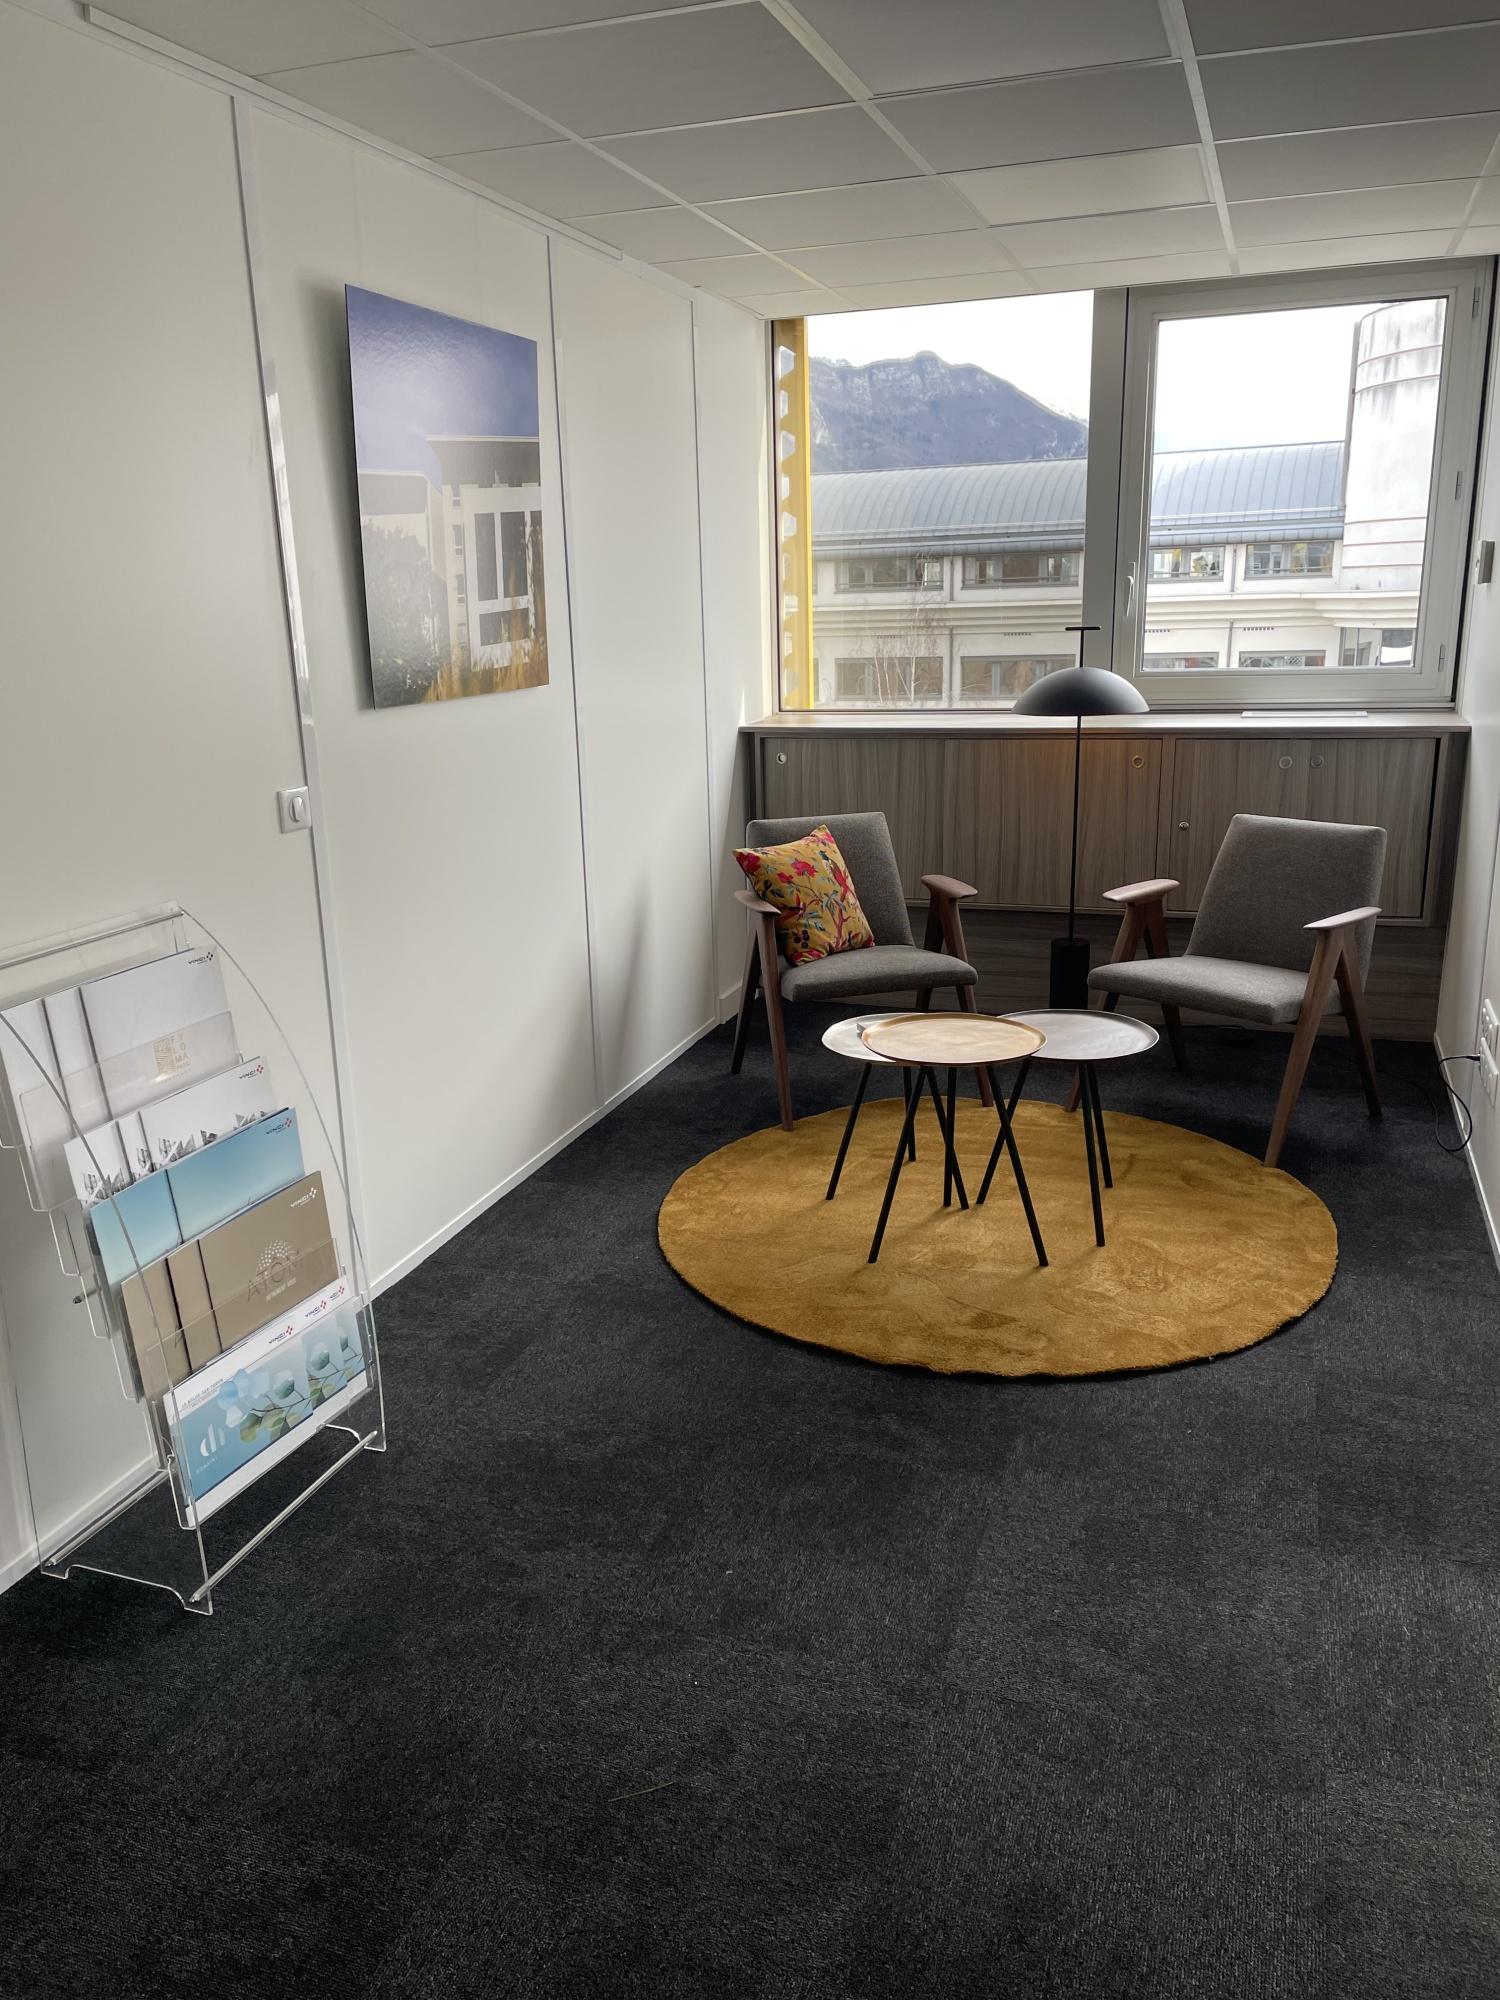 Vinci Immobilier Annecy